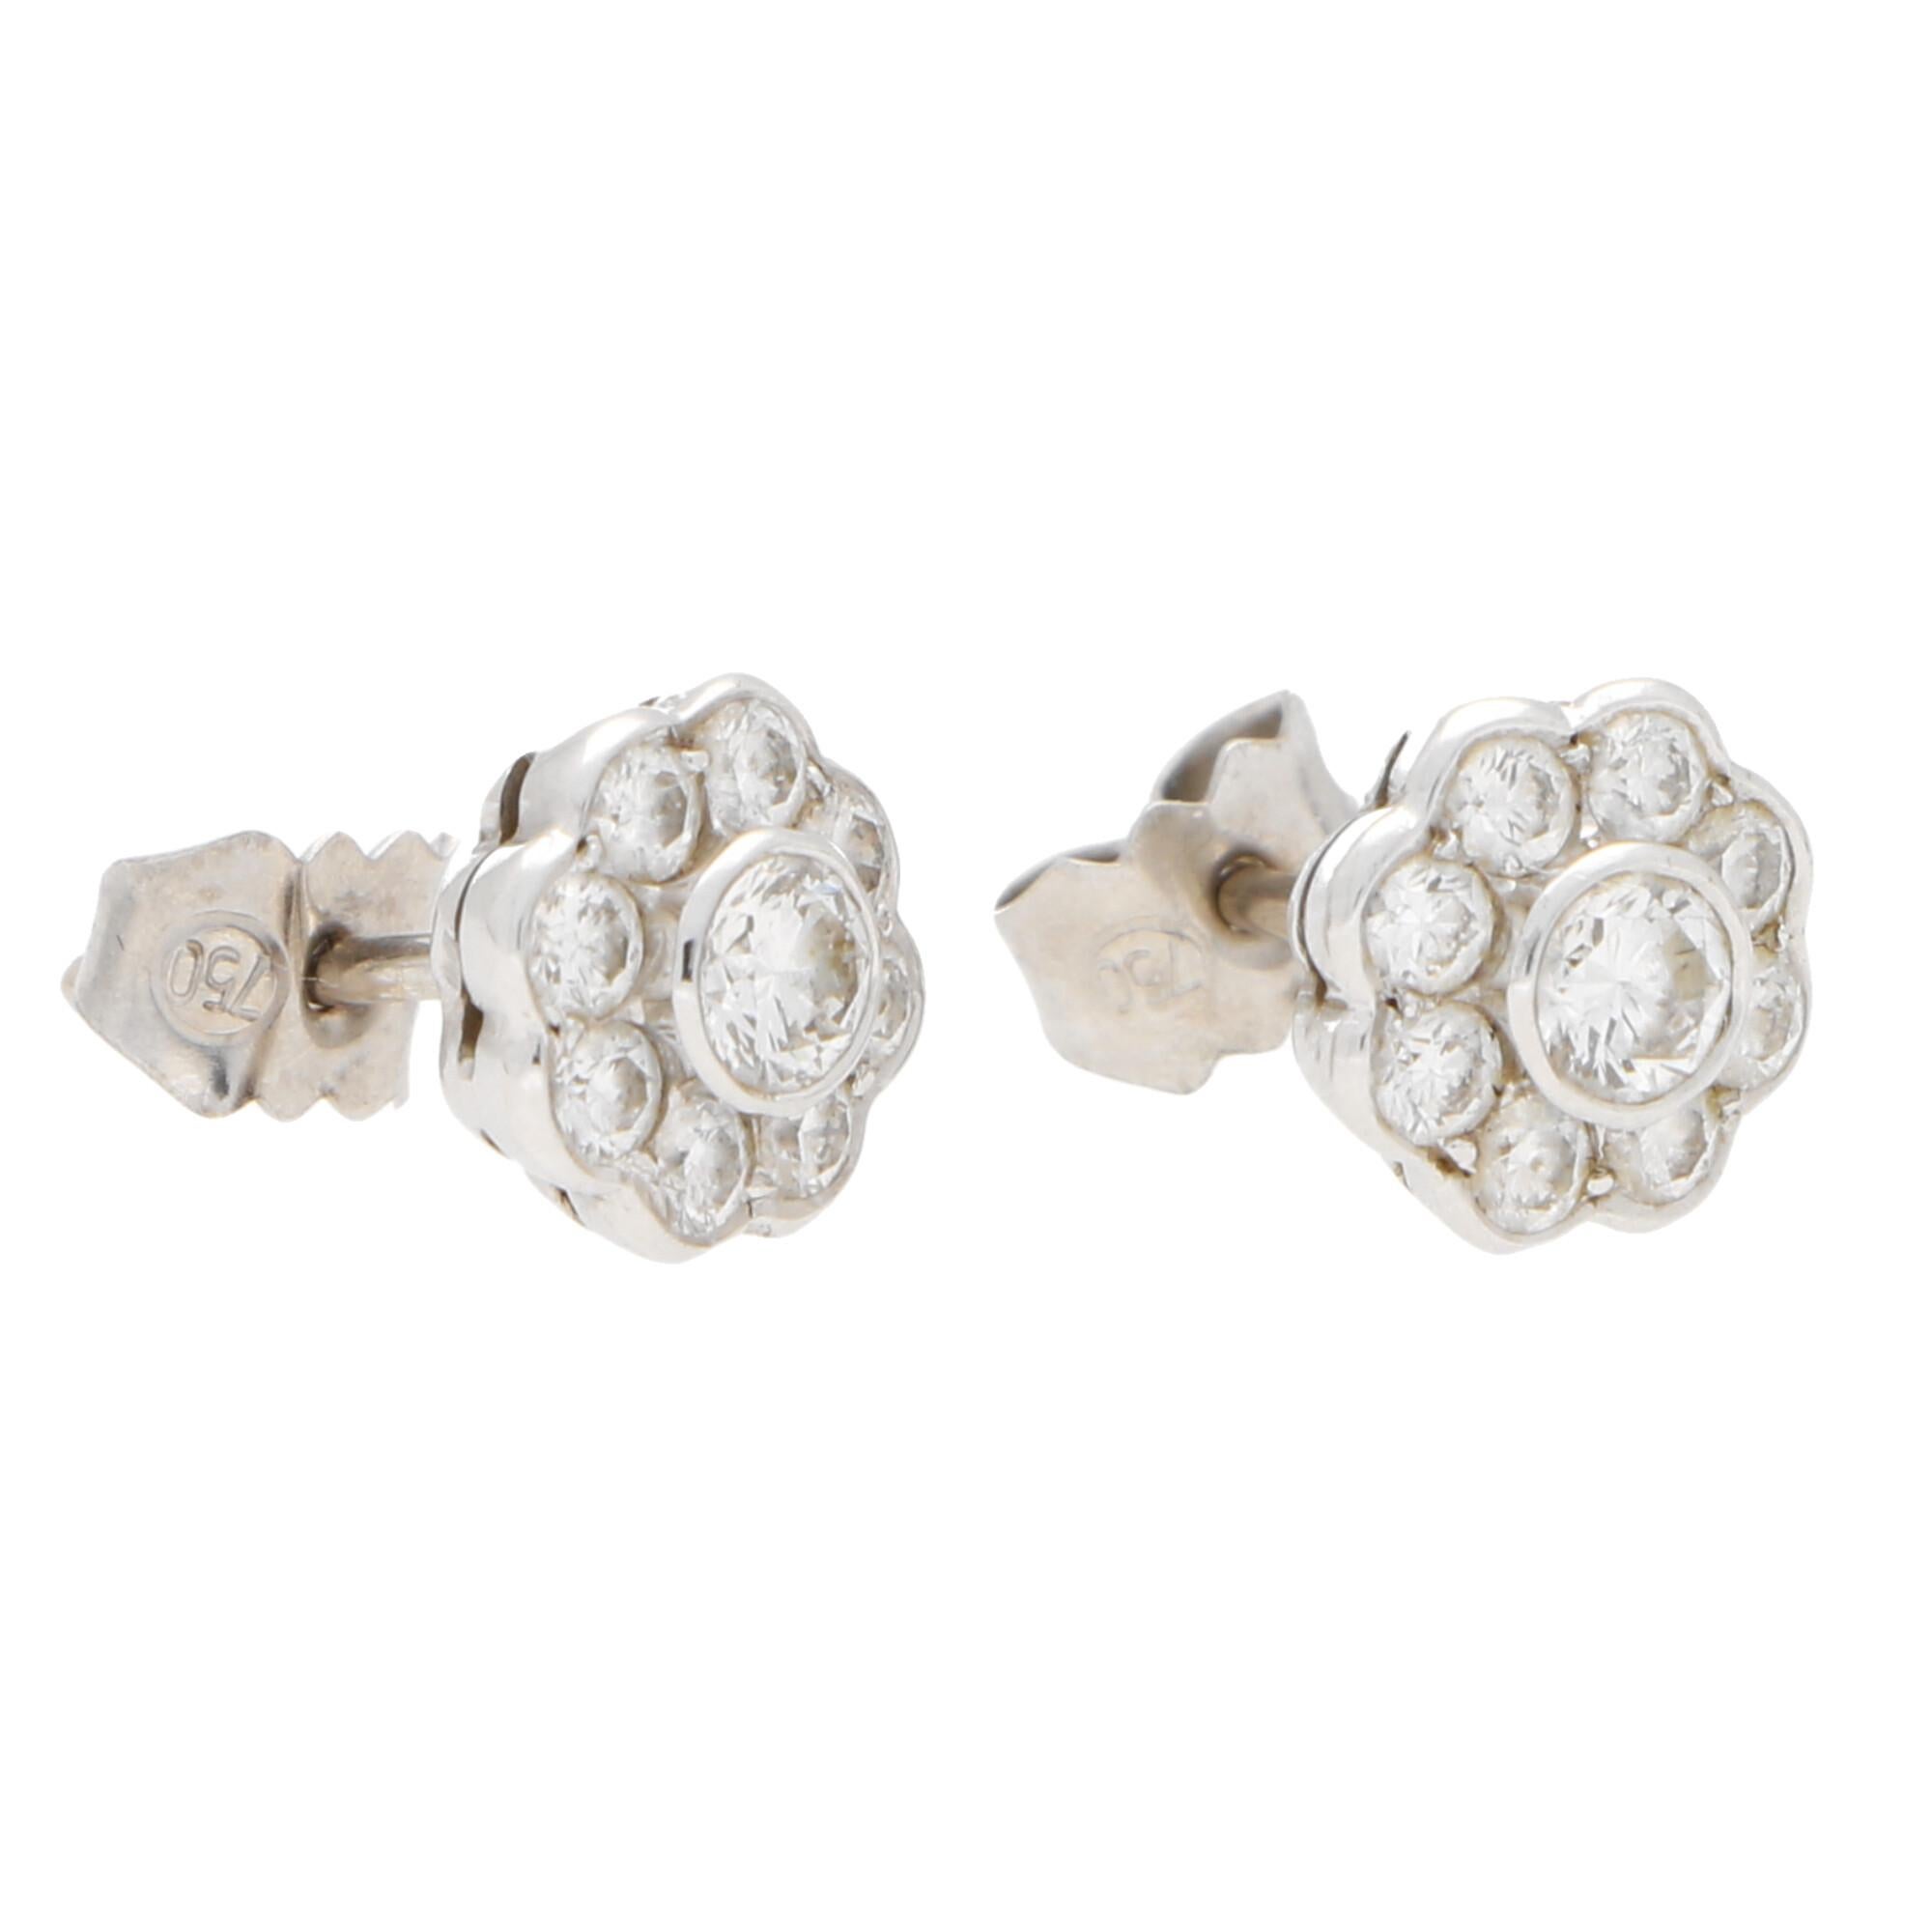 A lovely pair of diamond floral cluster earrings set in 18k white gold.

Each earring centrally features a sparkly round brilliant cut diamond surrounded by a cluster halo of 8 round brilliant-cut diamonds. All of the stones are securely rub over